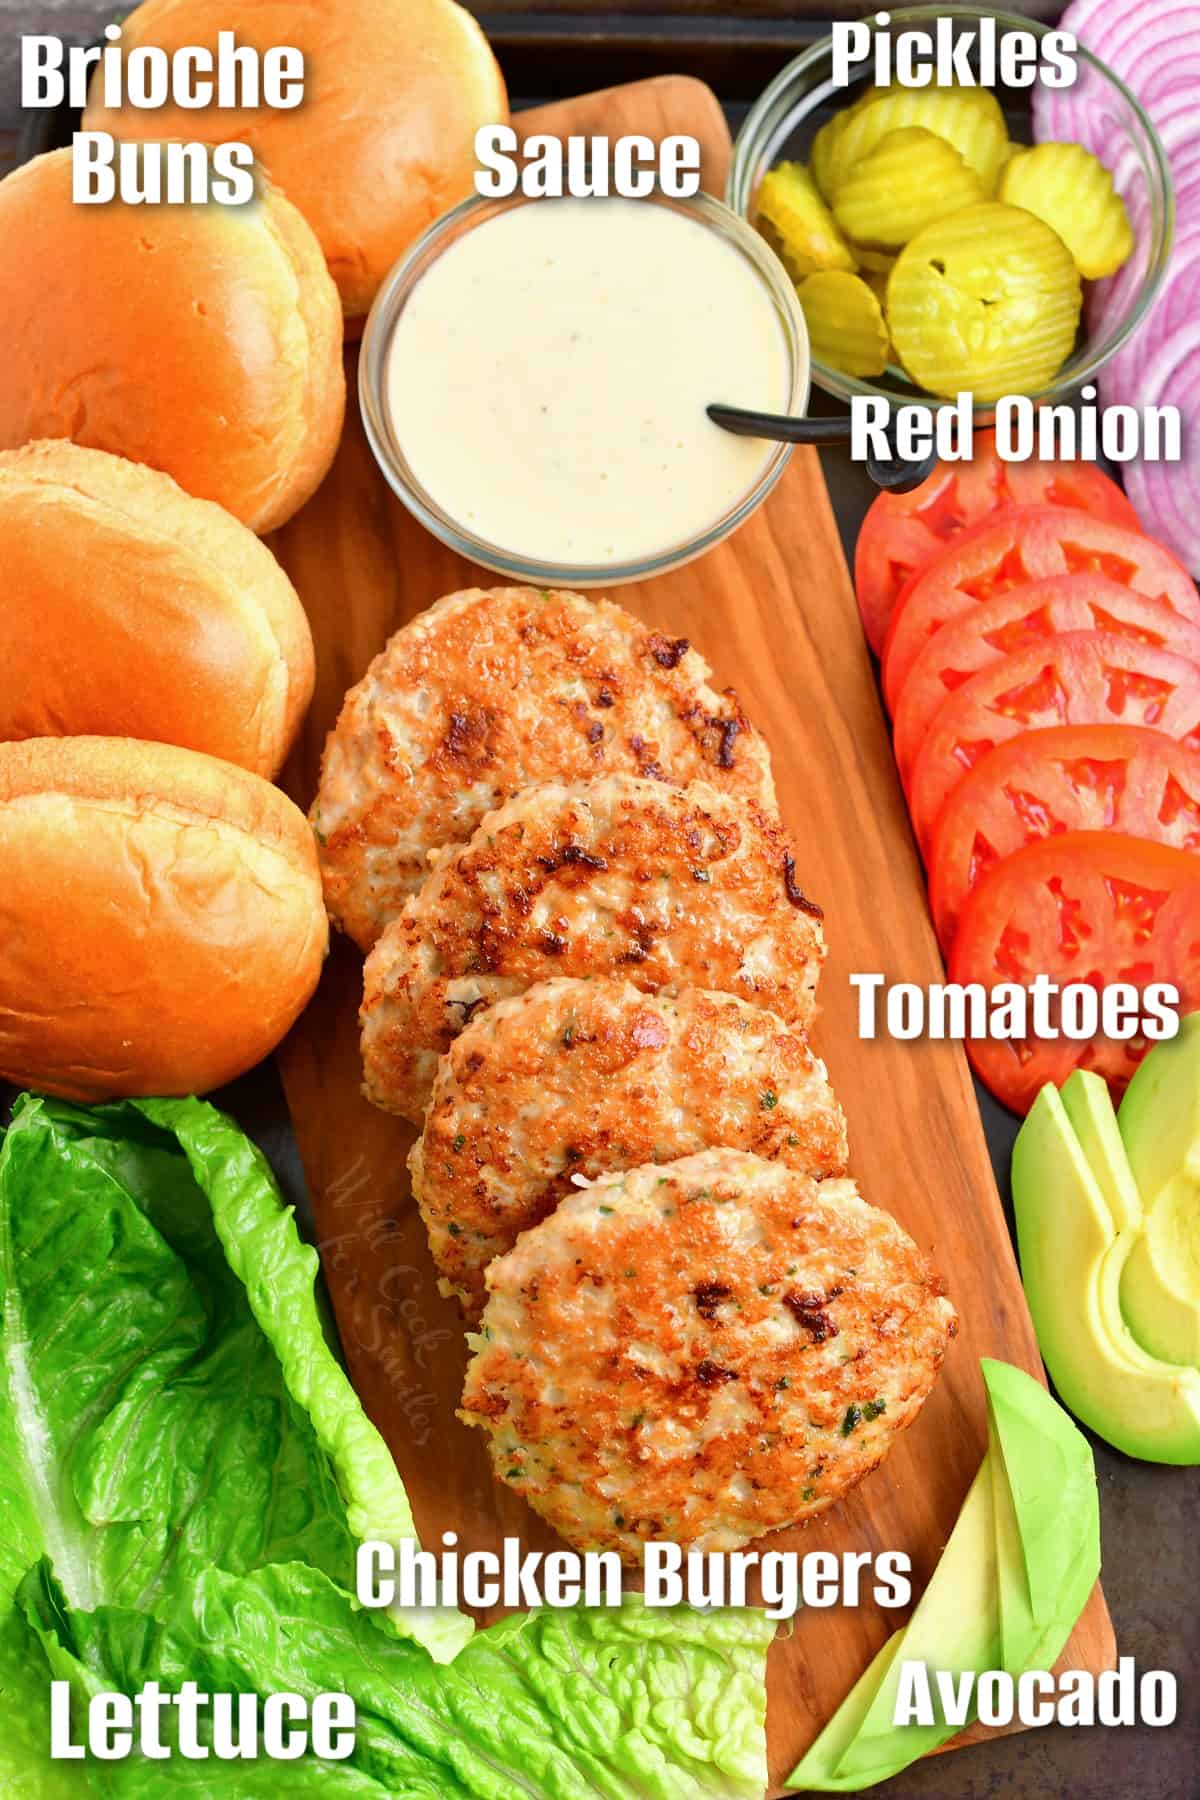 Ingredients to build a chicken burgers labeled in a cutting board.